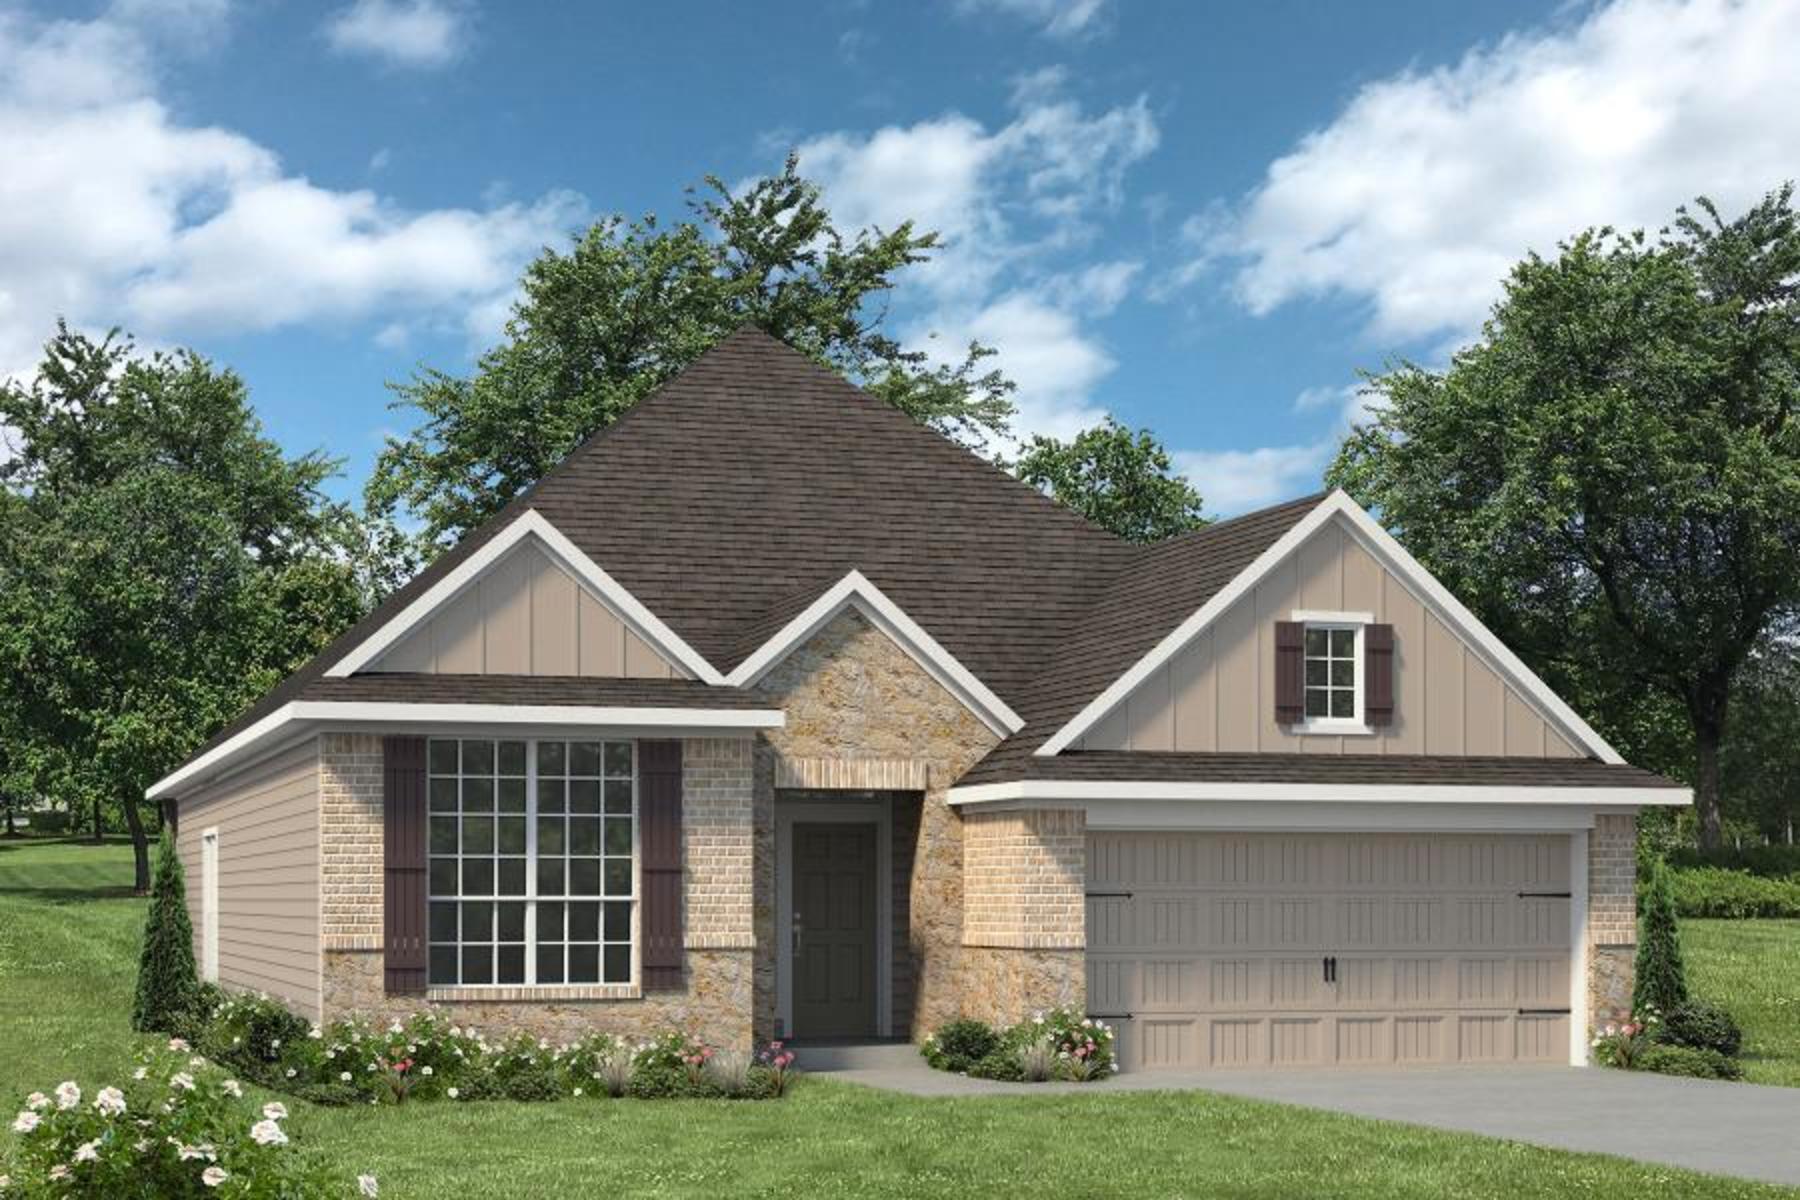 https://myhome.anewgo.com/client/stylecraft/community/Our%20Plans/plan/2082?elevId=46. Kent Home with 4 Bedrooms